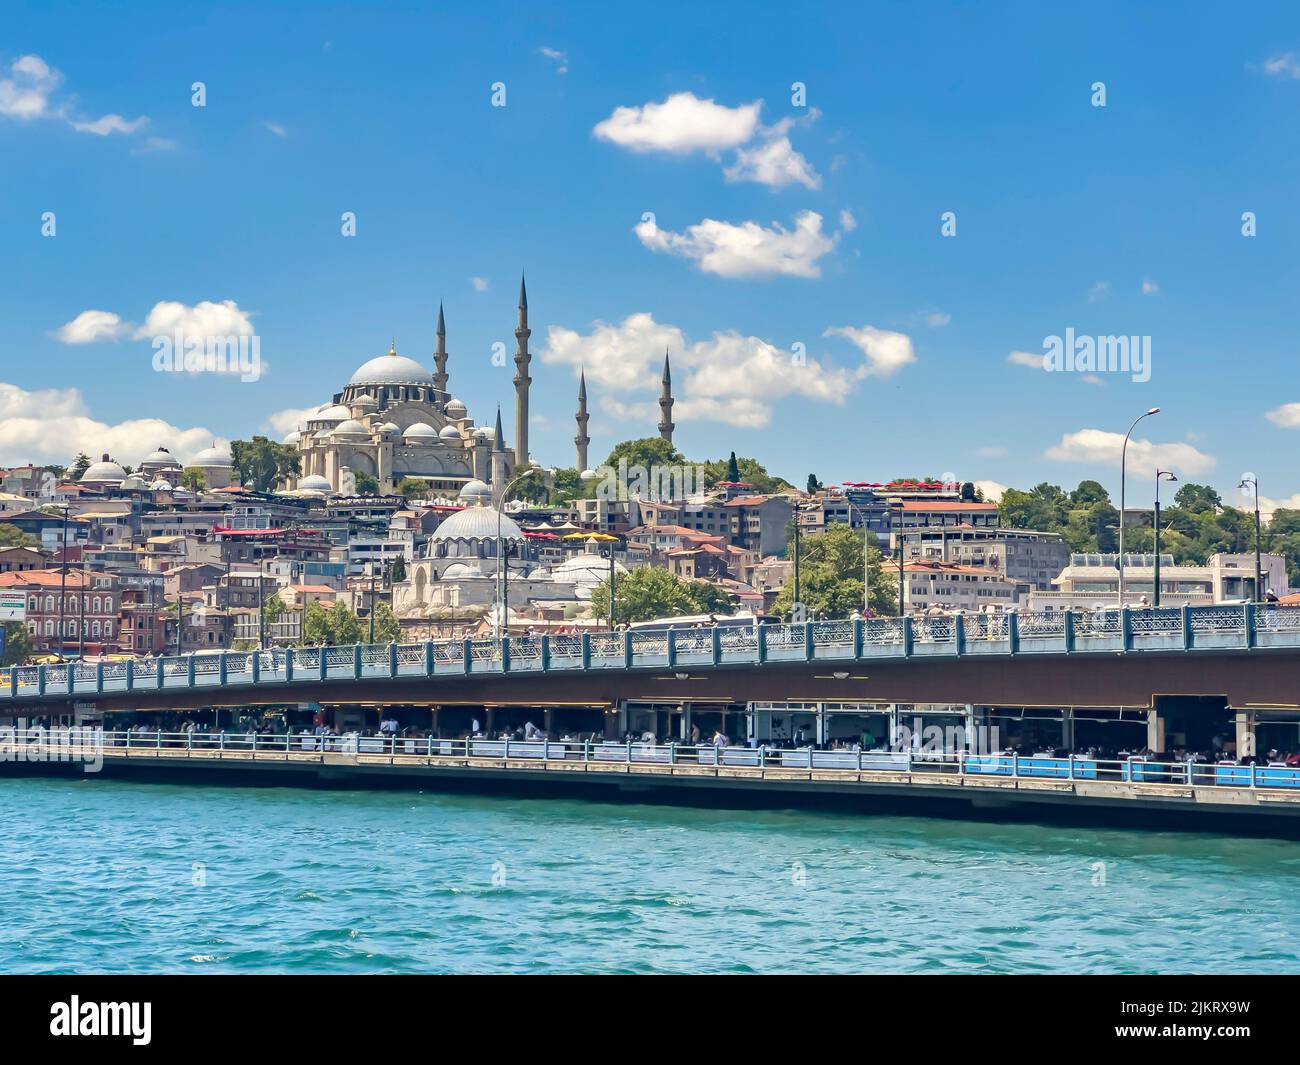 Galata bridge, Yeni Cami (New Mosque) and Suleymaniye Mosque in a row. Beautiful entrance of the Golden Horn in Istanbul Turkey, on a sunny day. Stock Photo